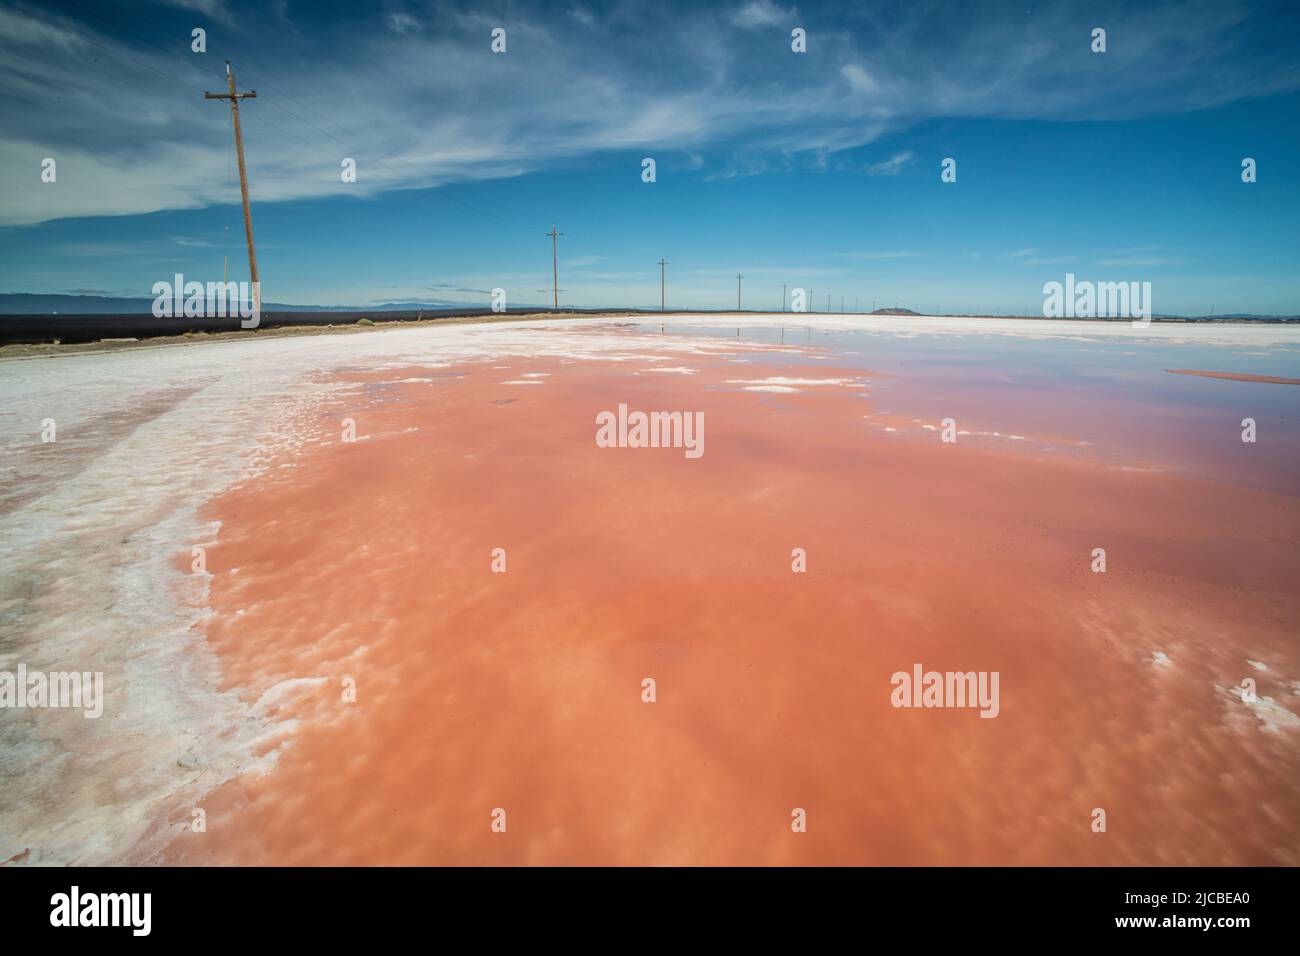 A landscape with Sea salt production ponds with pink water created by salt loving microbes. Stock Photo